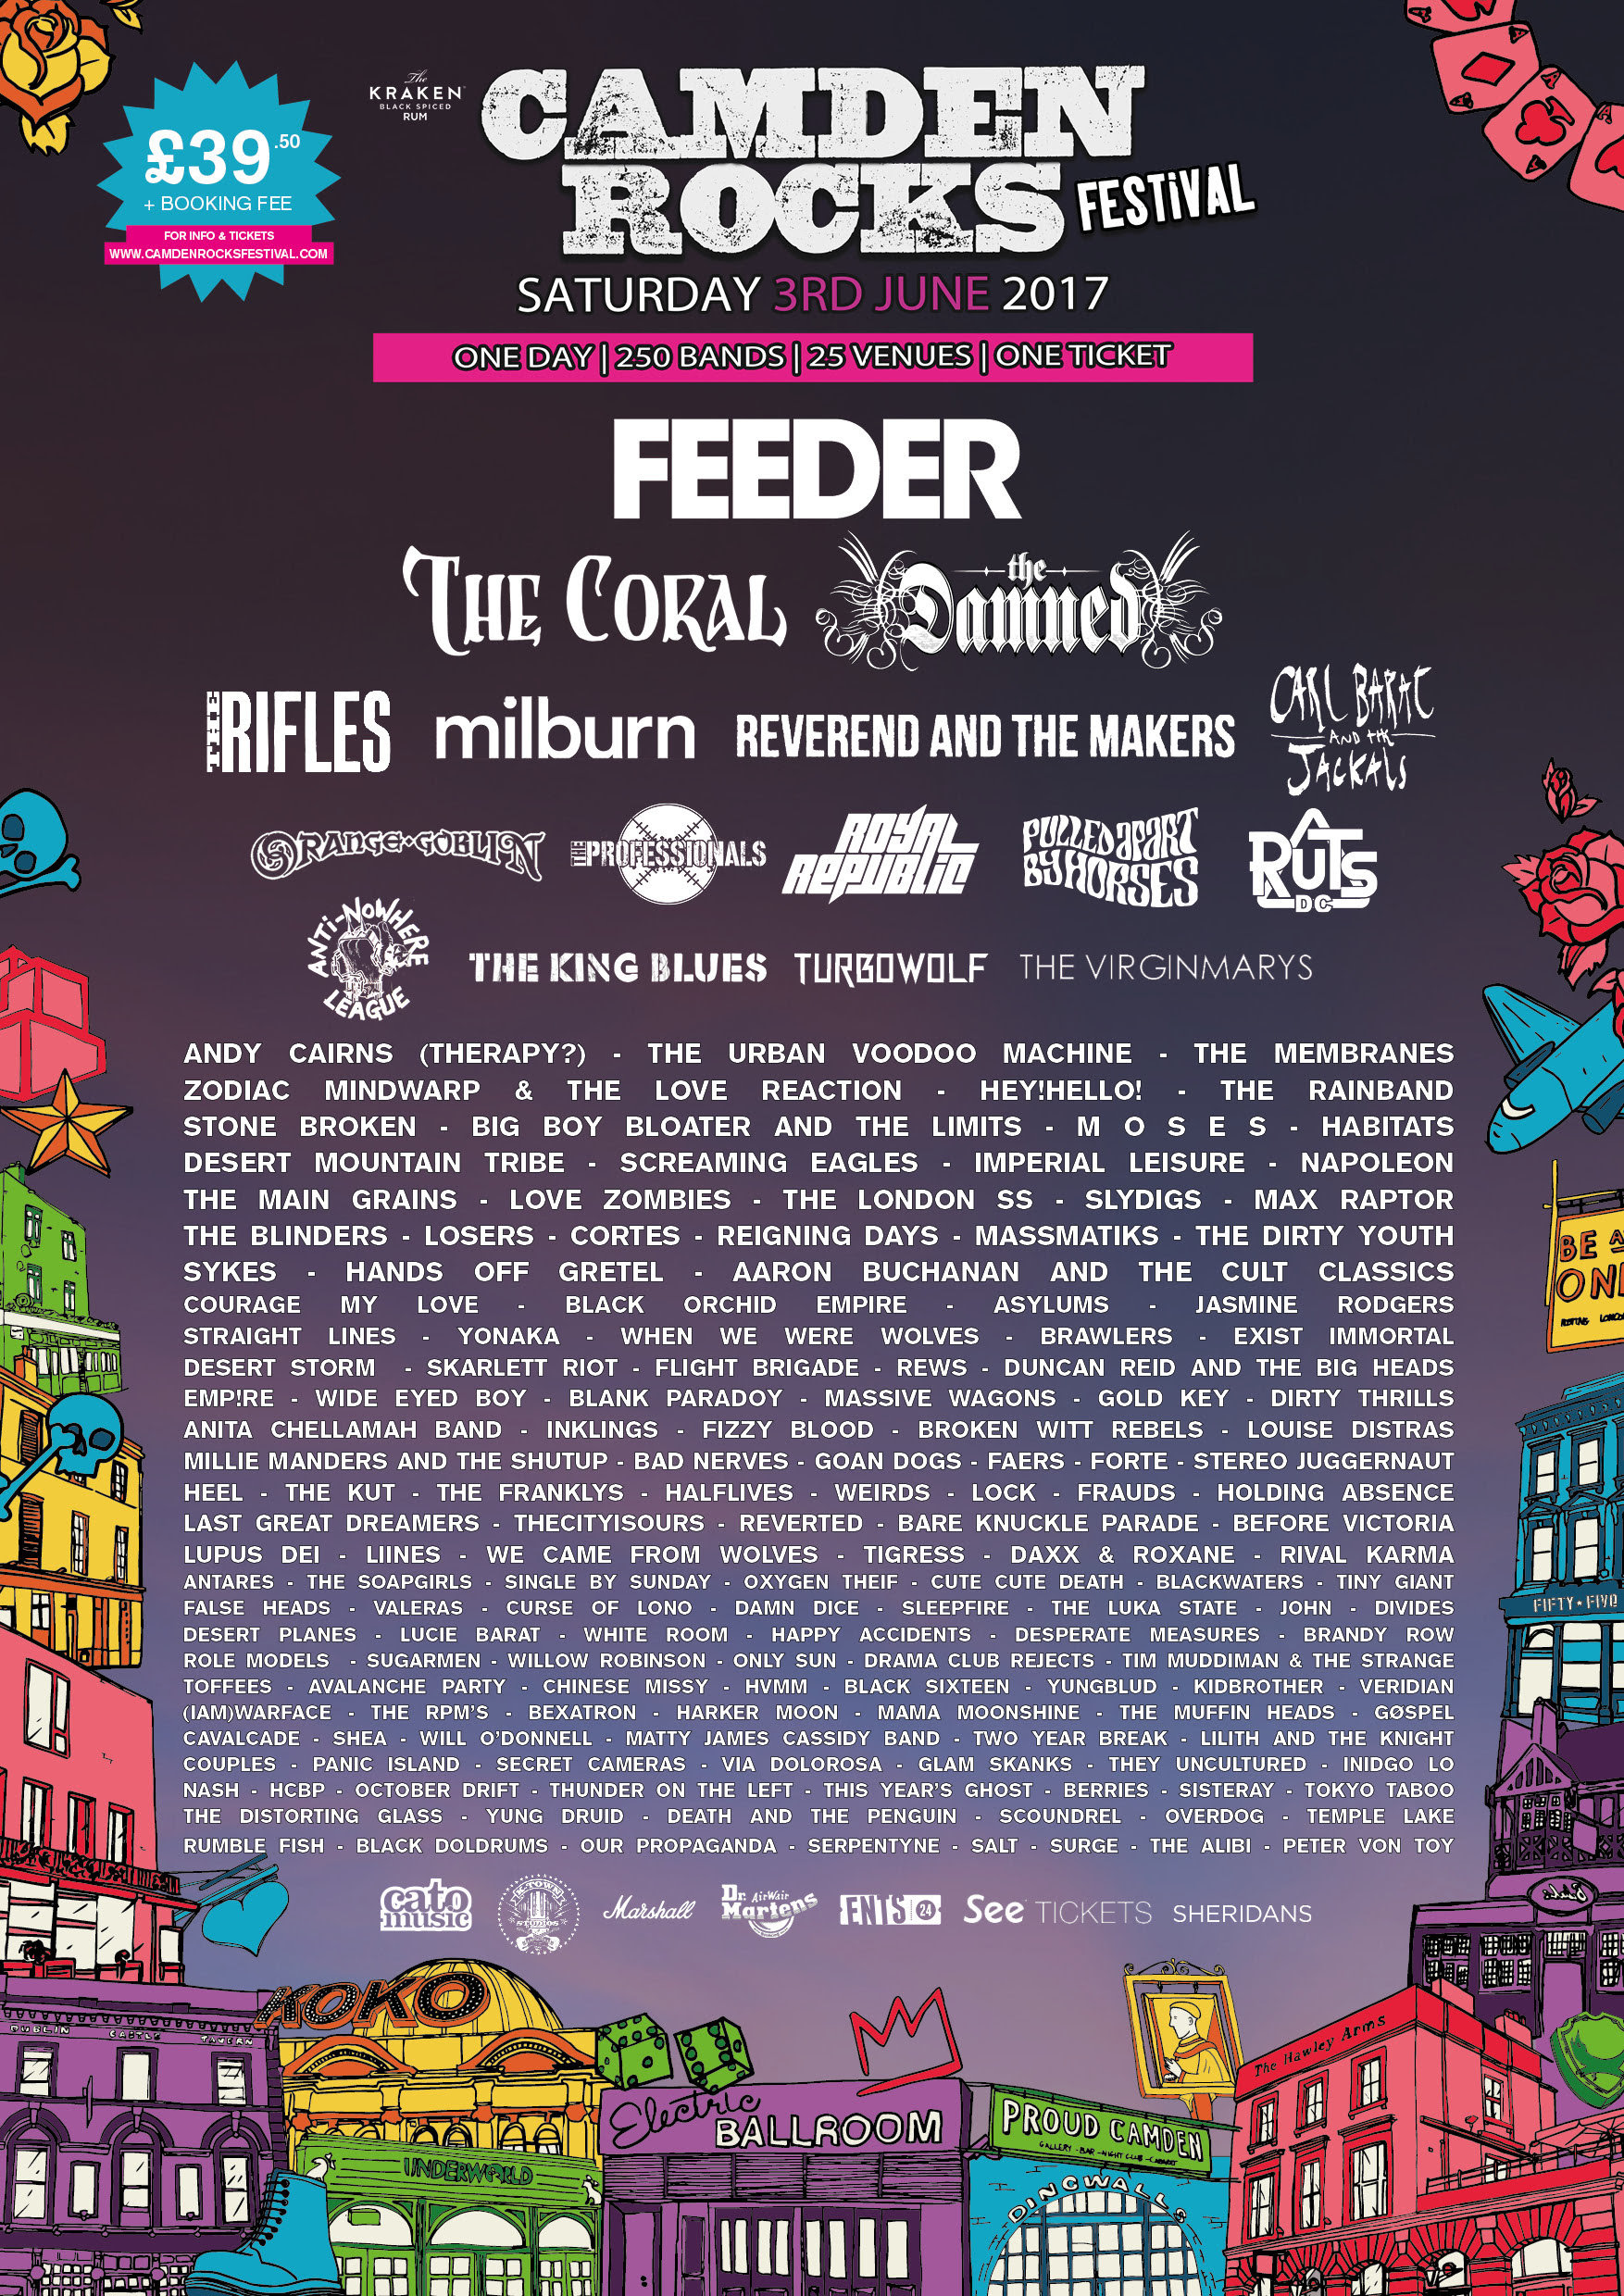 Royal Republic and Pulled apart by Horses announced for Camden Rocks Festival